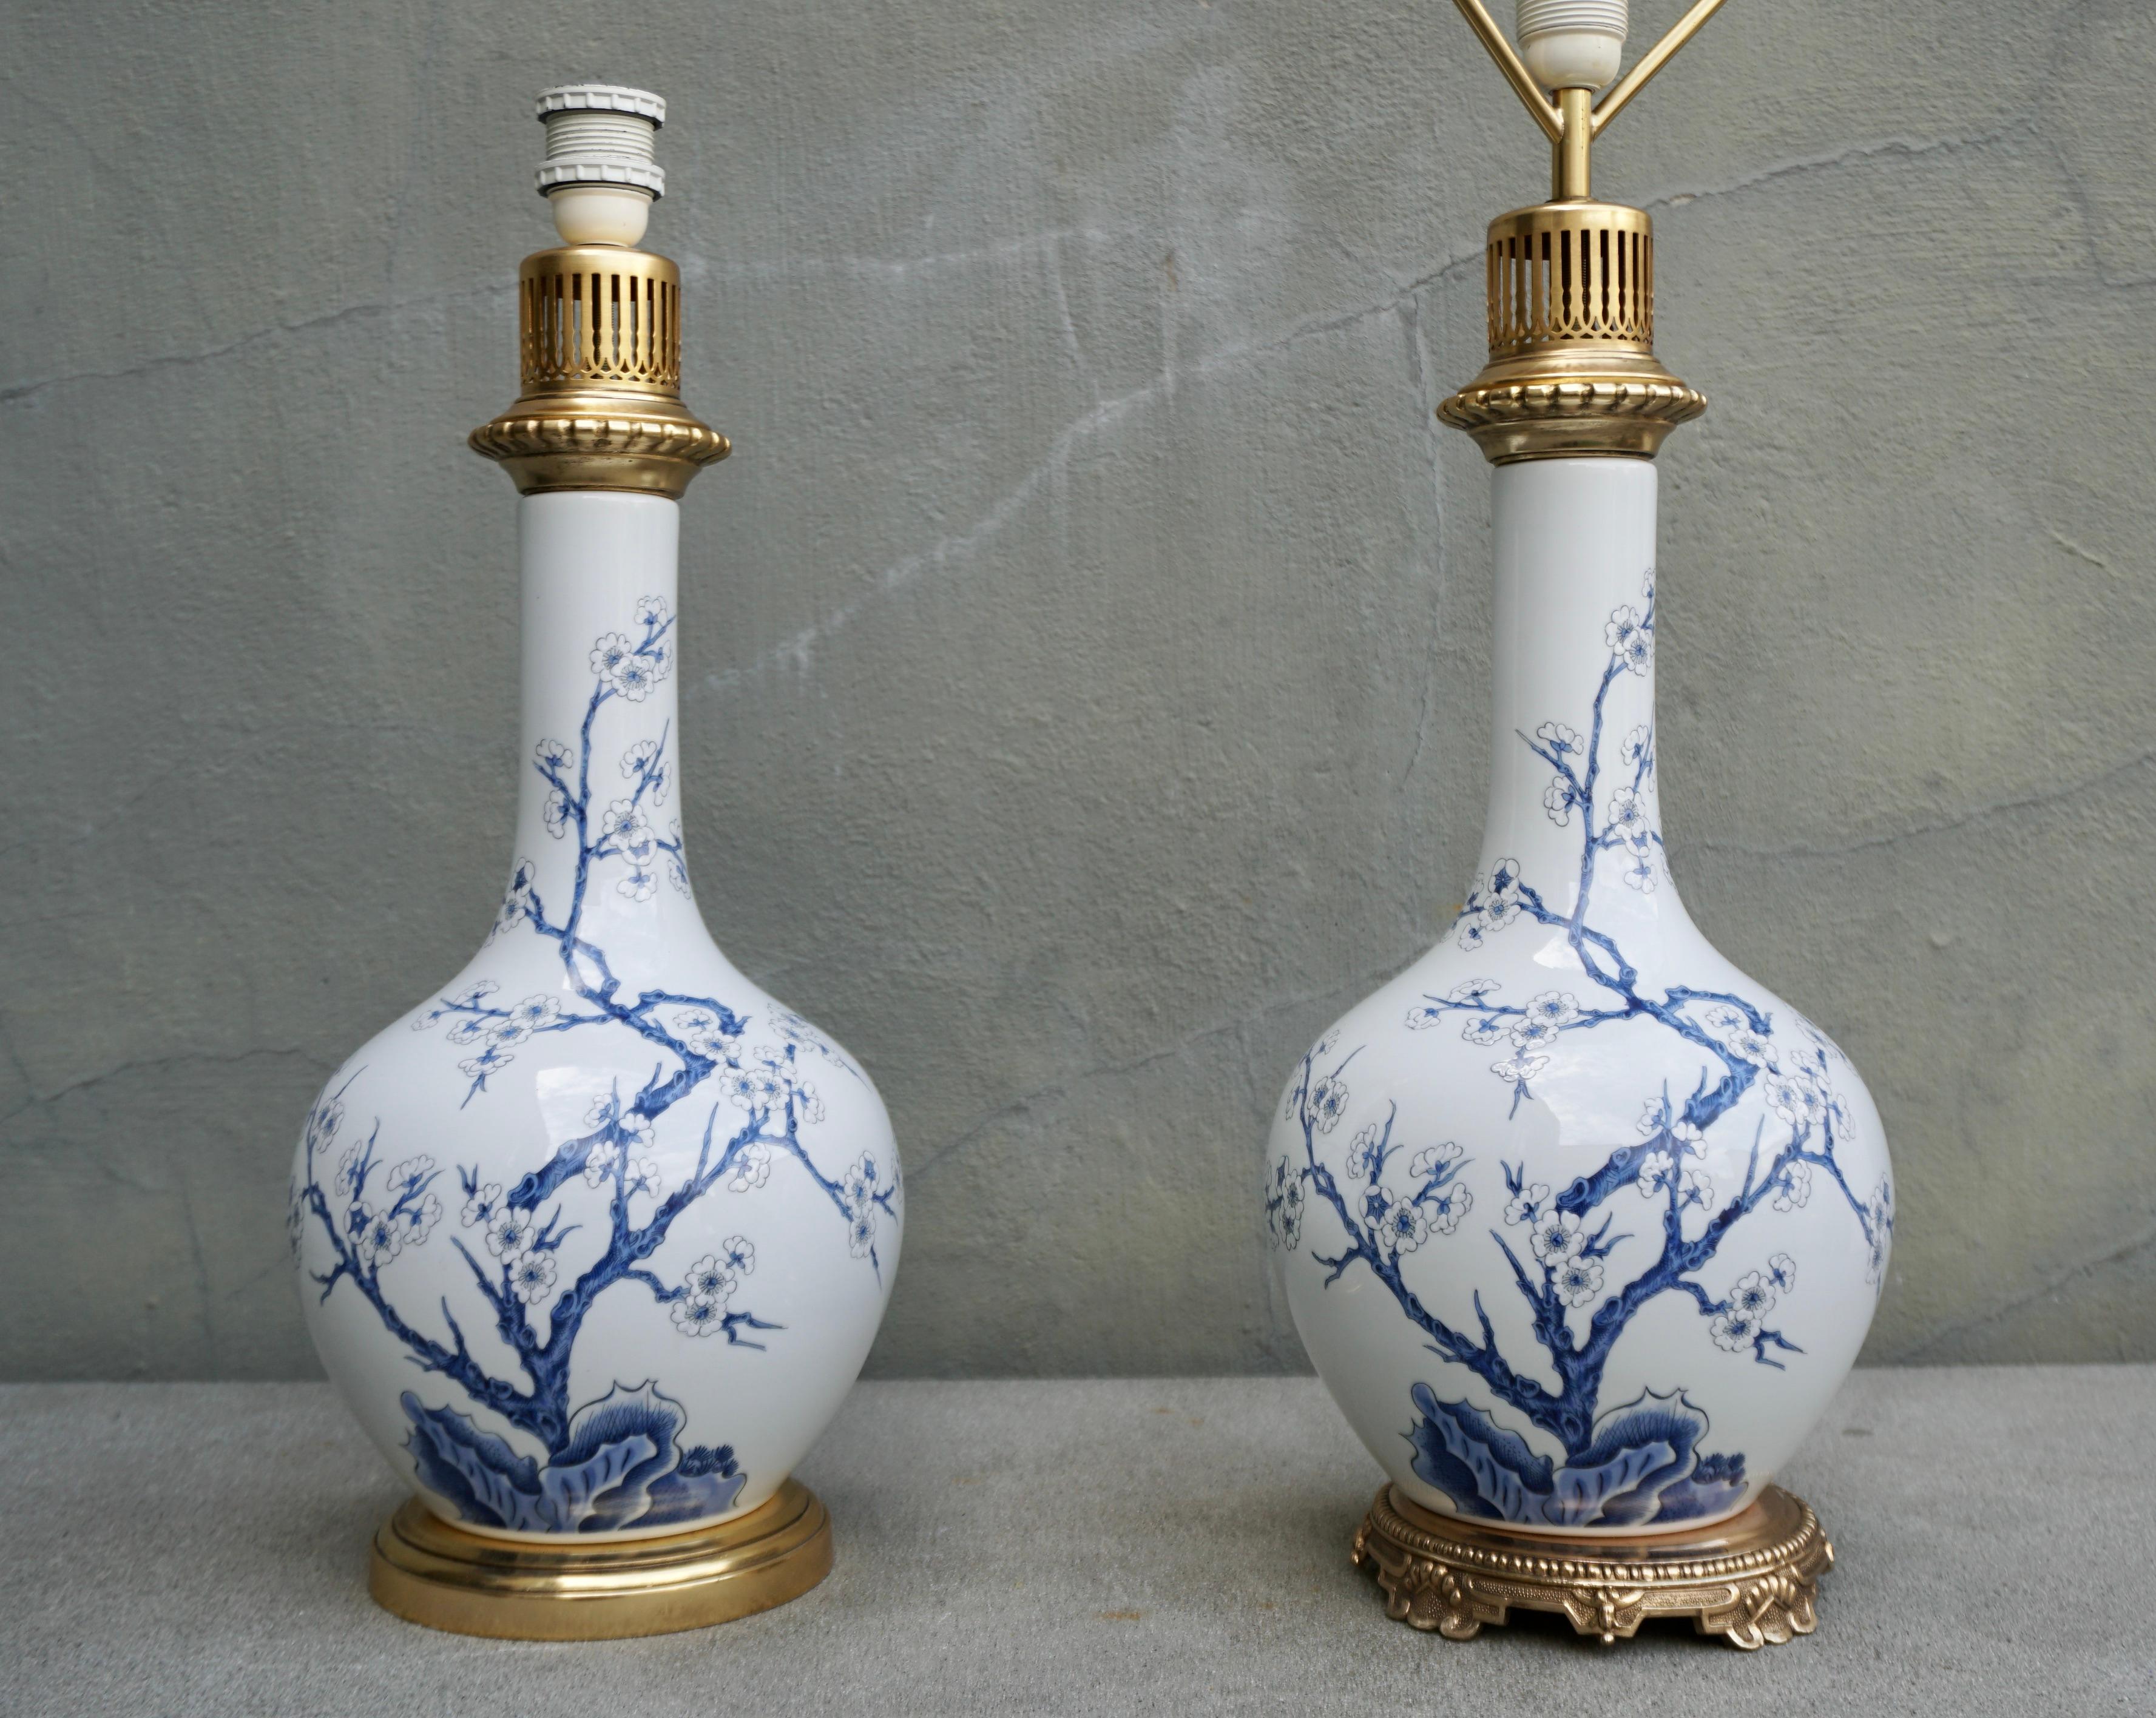 Two 1950s Chinese style blue and white porcelain table lamp with floral decoration and bronze base. 
Each lamp decorated with meandering branchwork and cherry blossoms; underside with under-glaze blue stamp 'Porcelaine De Paris, France, Fondee en